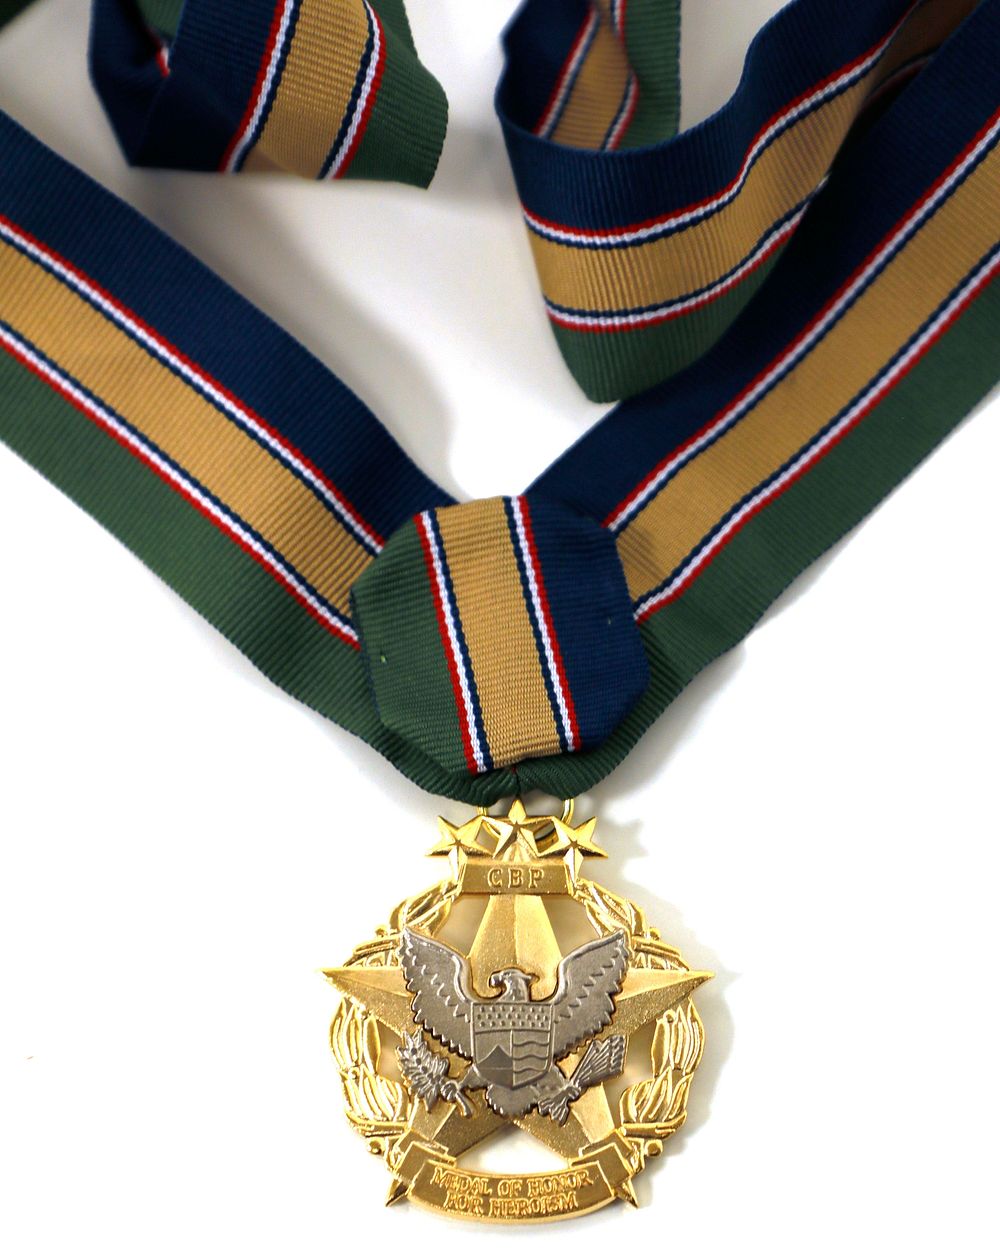 CBP Medals and Awards Images